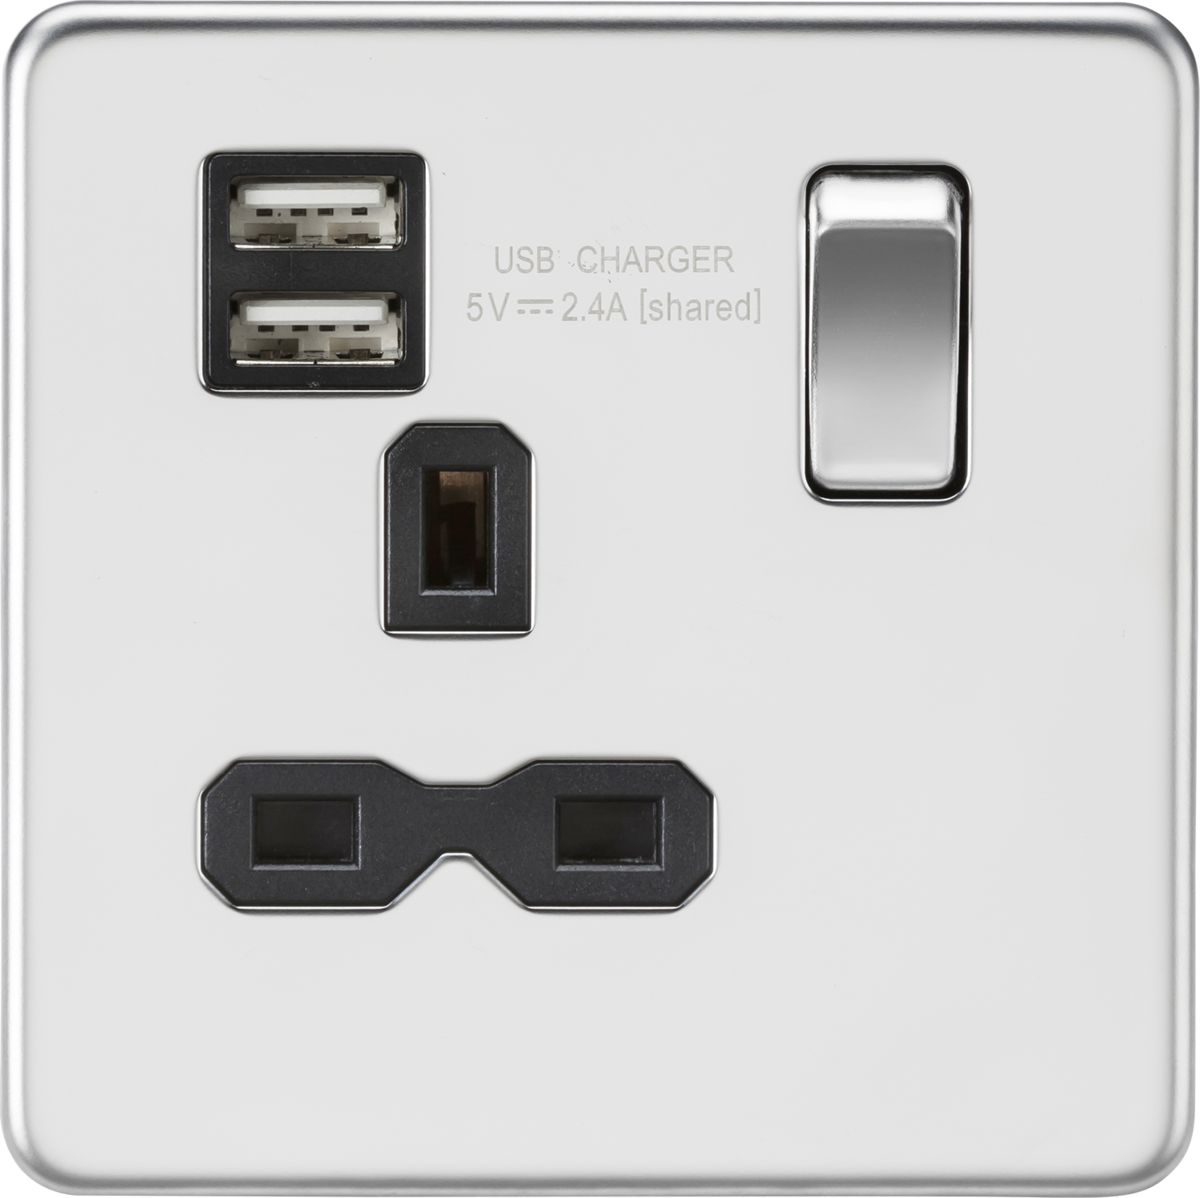 Screwless 13A 1G switched socket with dual USB charger (2.4A) - polished chrome with black insert